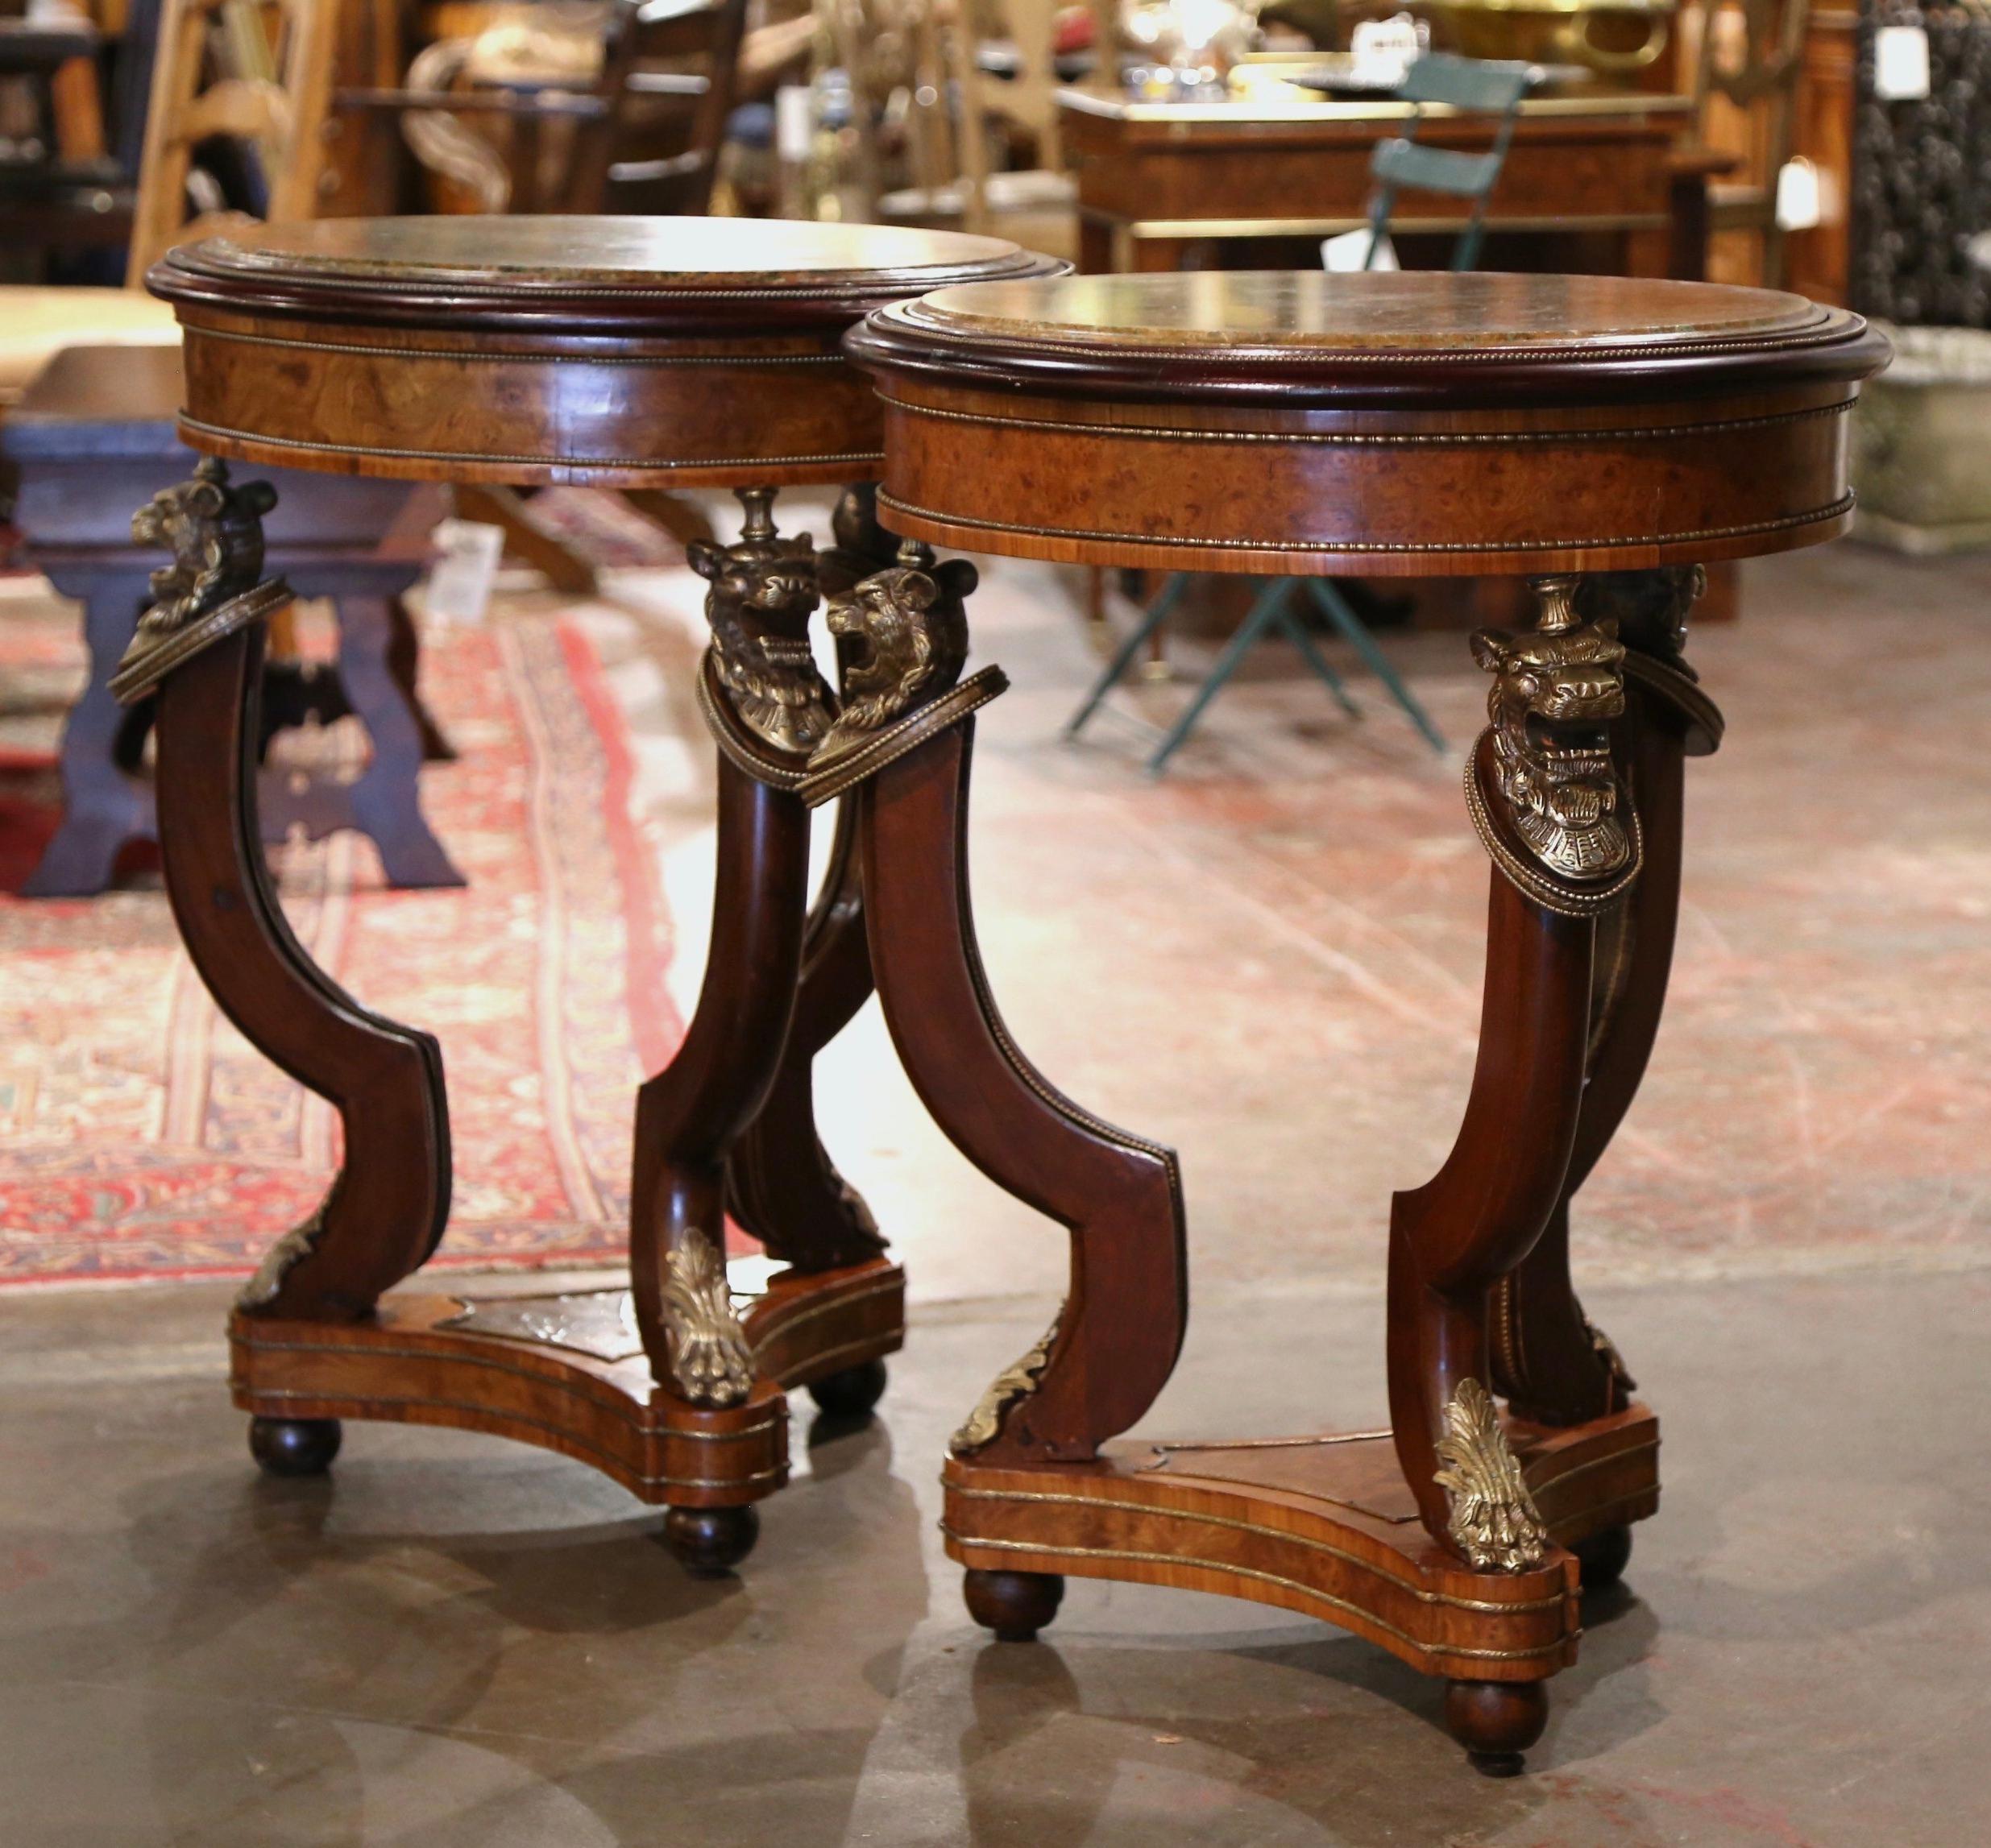 Decorate a living room or den with this elegant pair of antique round gueridons. Crafted in France circa 1870, each fruit wood table stands on three cabriole legs decorated with bronze lion head figures mounts at the shoulders, and ending with